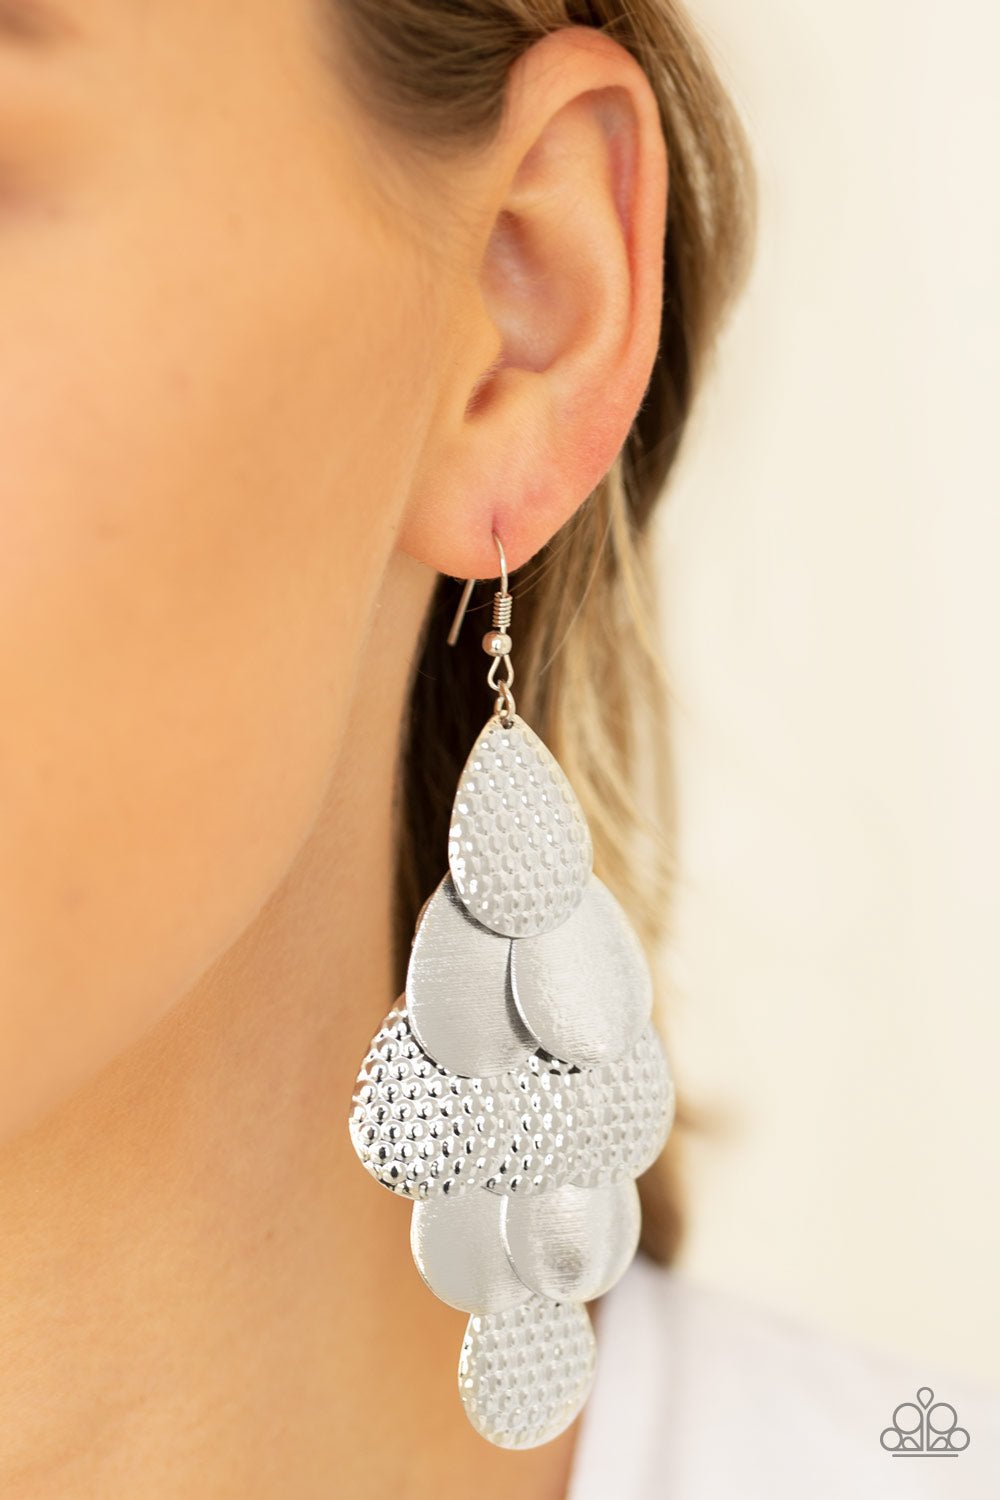 Chime Time - Silver Earrings- Paparazzi Accessories - Paparazzi Accessories 